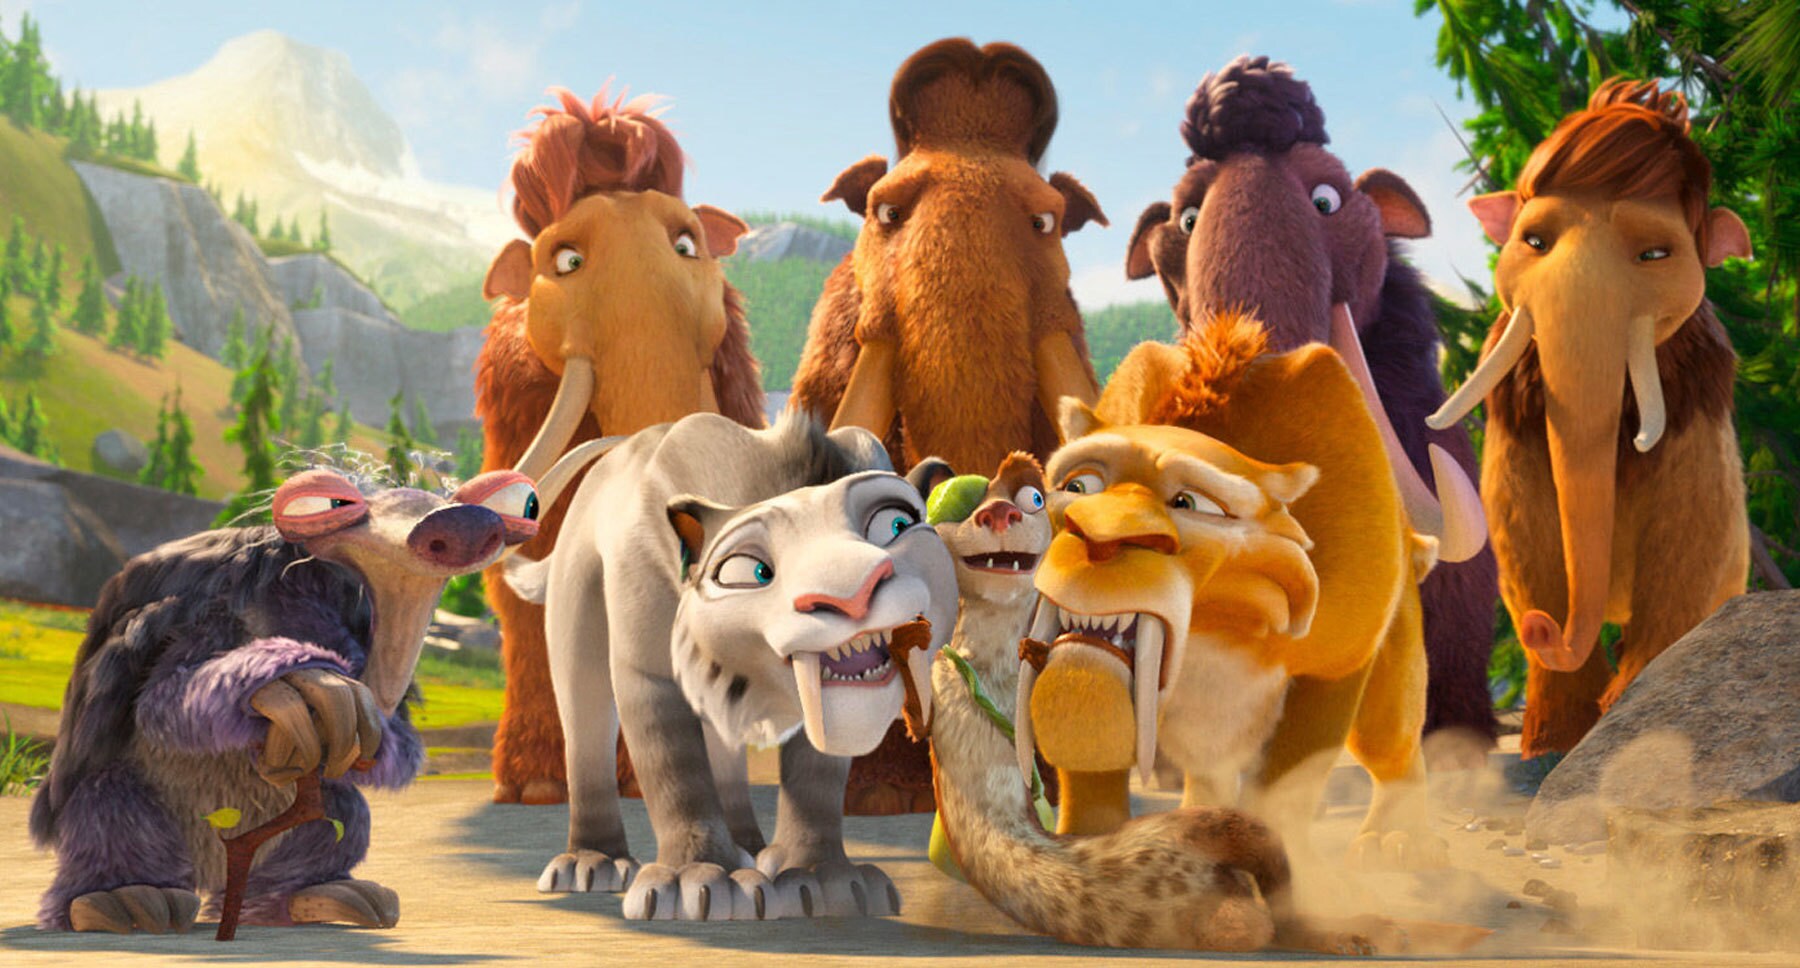 ice age 5 full movie in hindi free download